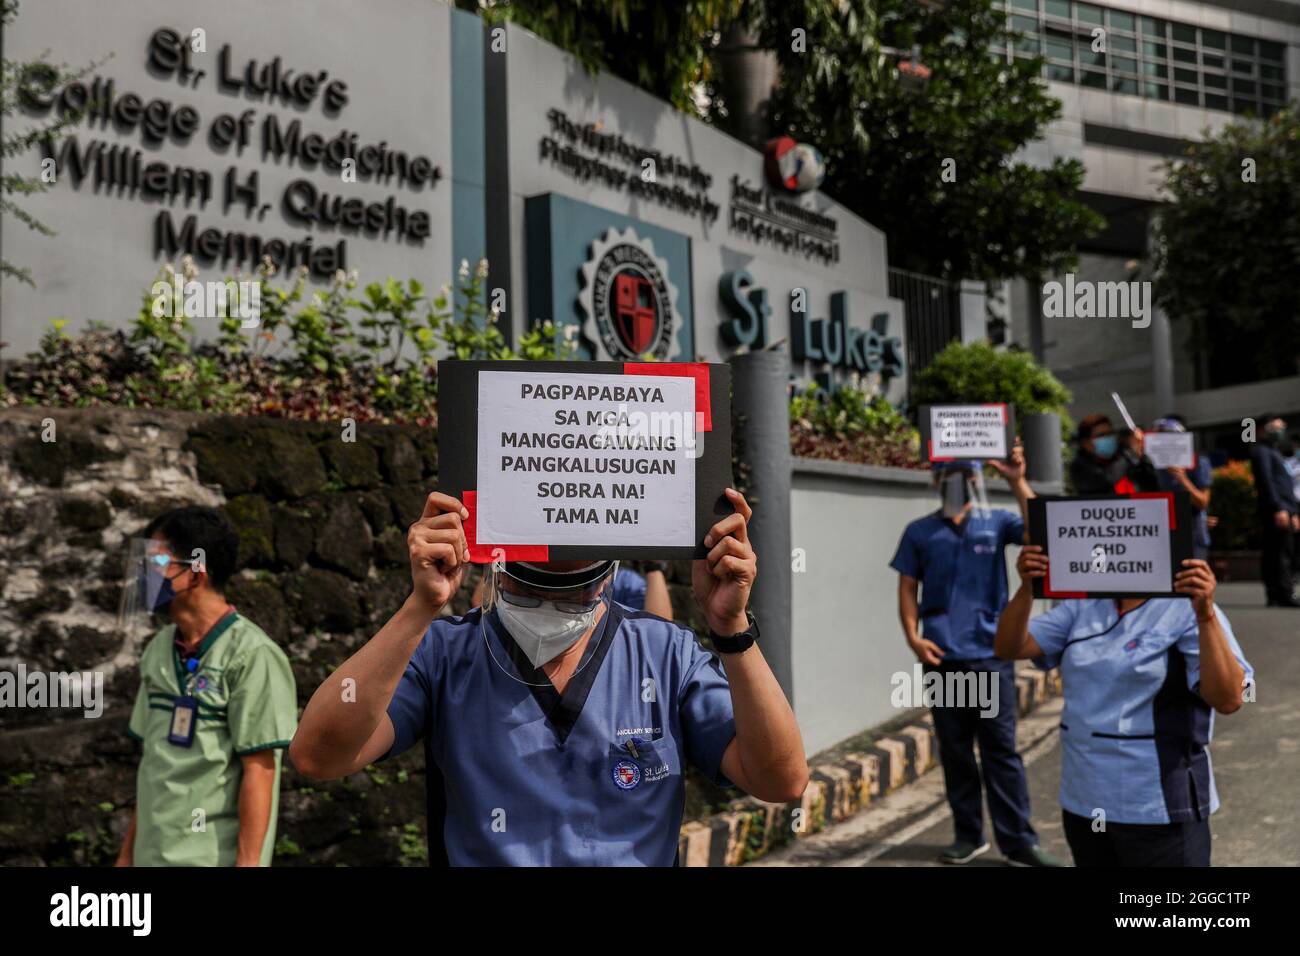 Metro Manila, Philippines. 30th August 2021. Healthcare workers carry signs during a protest to mark National Heroes Day outside the St. Luke's Medical Center in Quezon City. The group called on the government to release funds for benefits and adequate protection for medical workers who continue to be at risk amid the surge of COVID-19 cases in the country. Credit: Majority World CIC/Alamy Live News Stock Photo